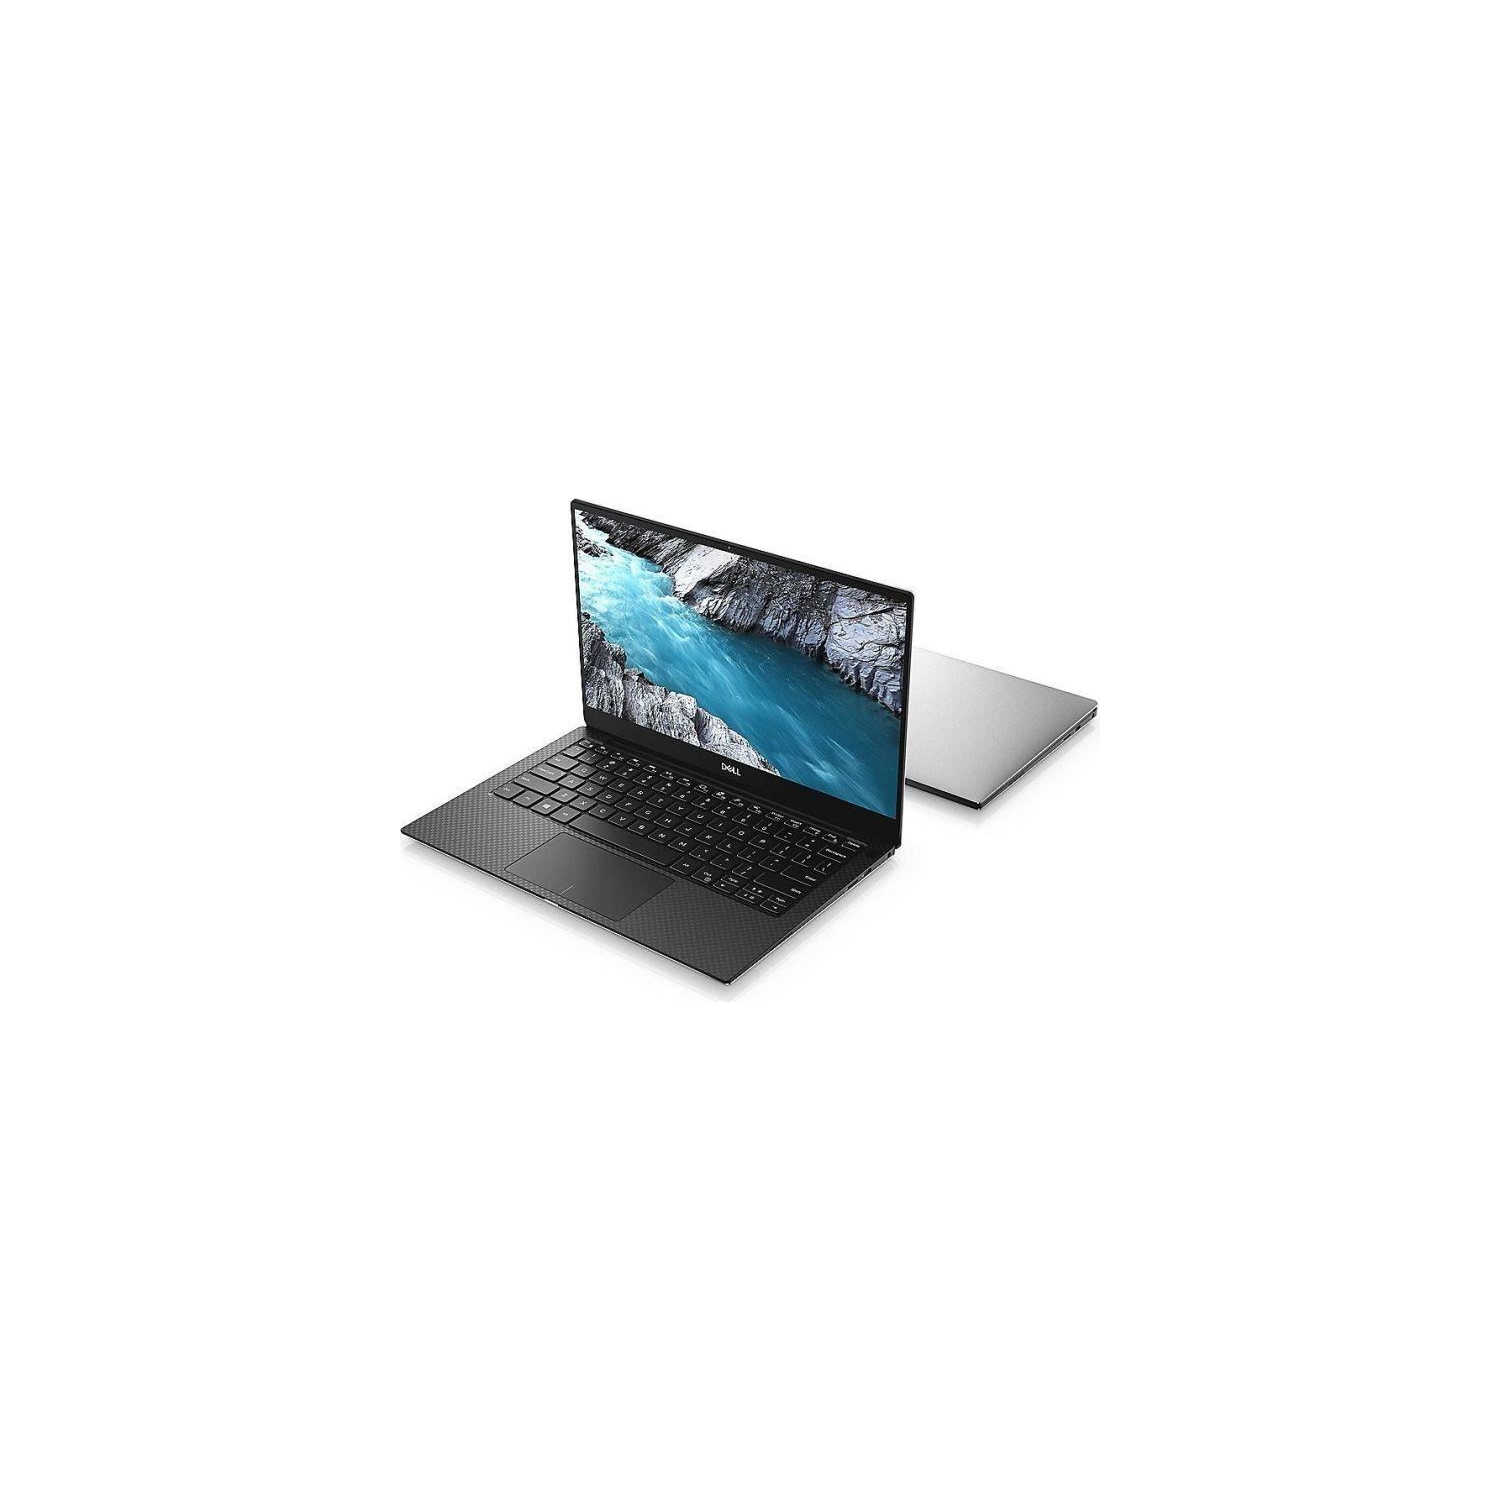 Refurbished (Excellent) - Dell XPS 13 9380 13" 4K UHD Touchscreen Laptop (Intel Core i7-8565U / 512GB SSD / 16GB RAM) - Certified Refurbished